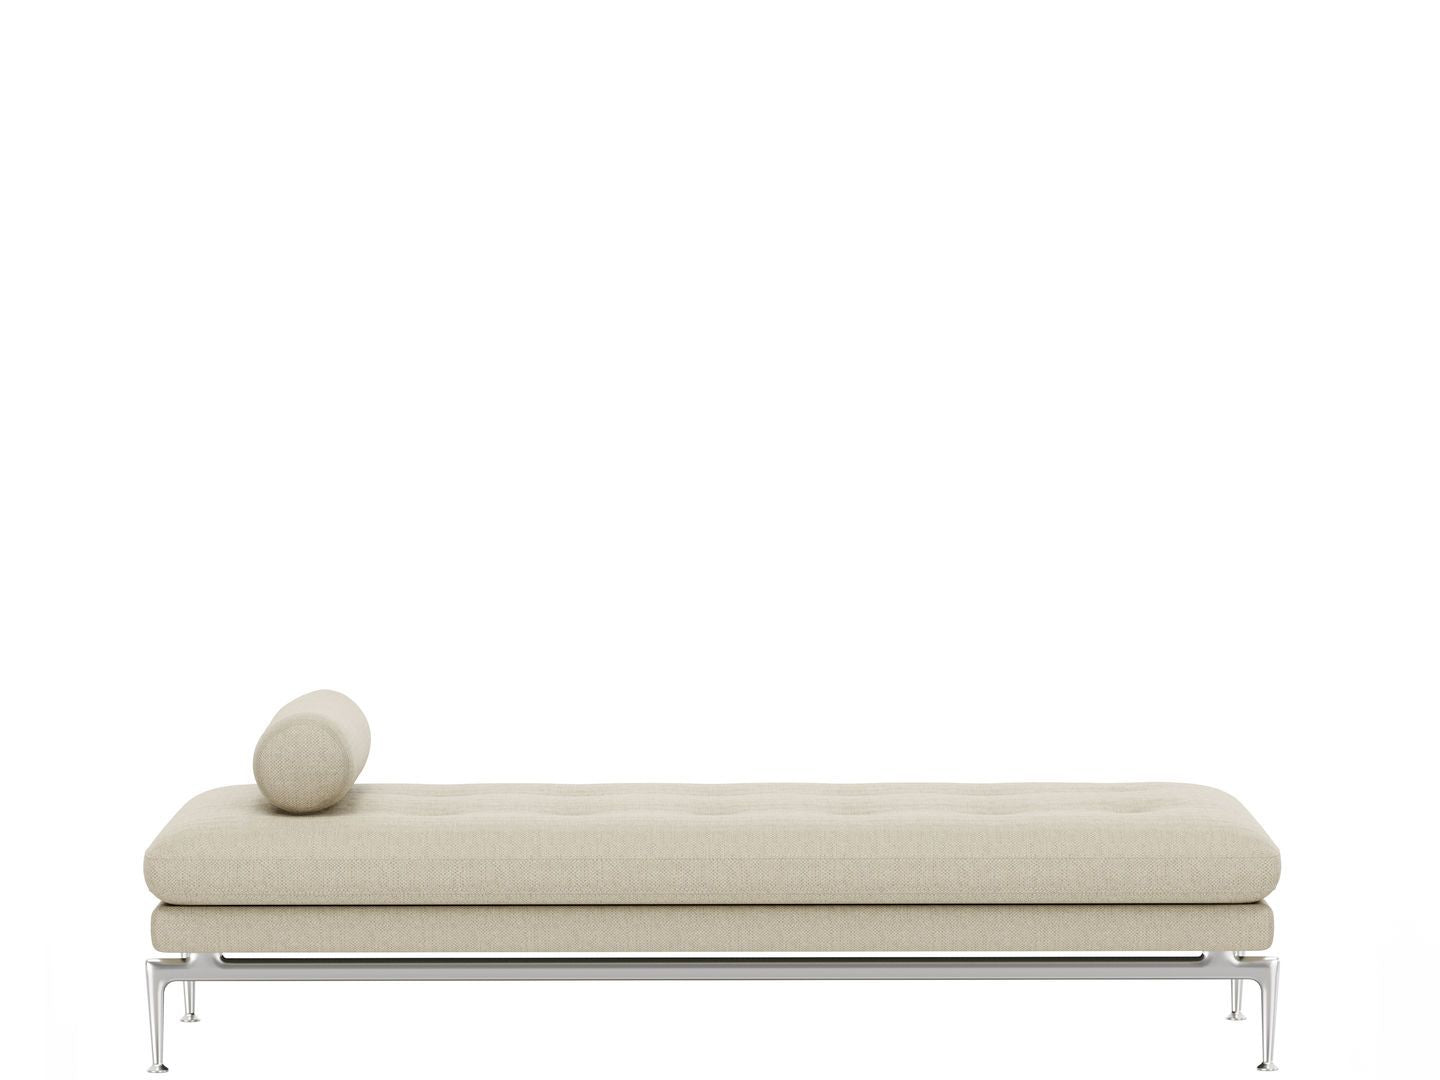 Vitra Suita Ottoman & Daybed - Perfect for Relaxing and Lounging in Style